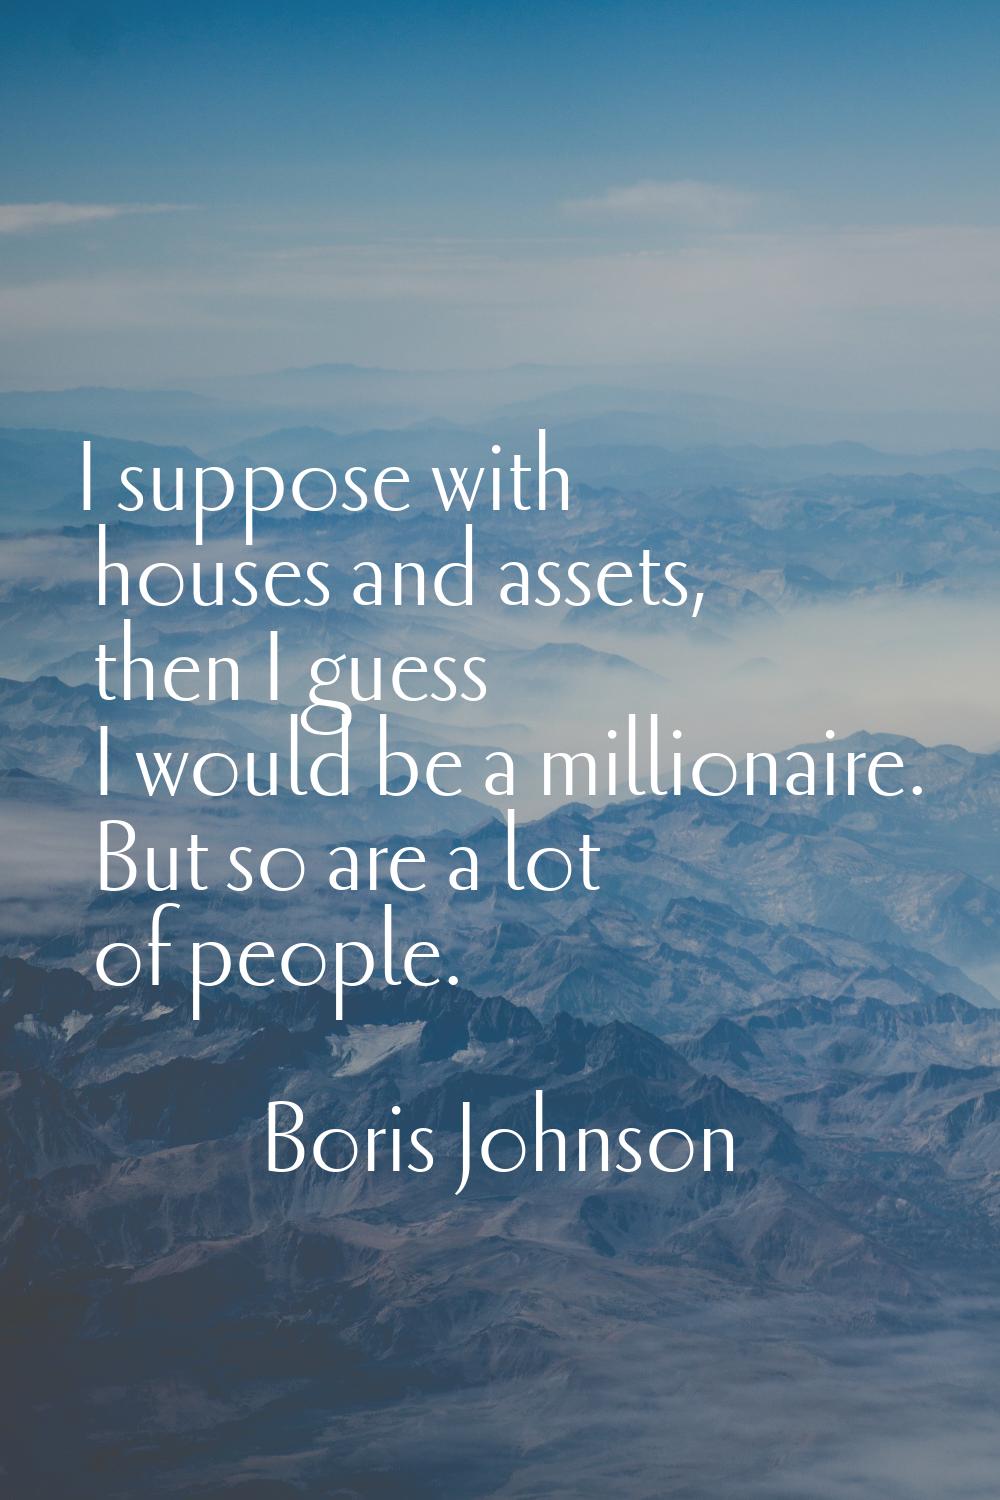 I suppose with houses and assets, then I guess I would be a millionaire. But so are a lot of people